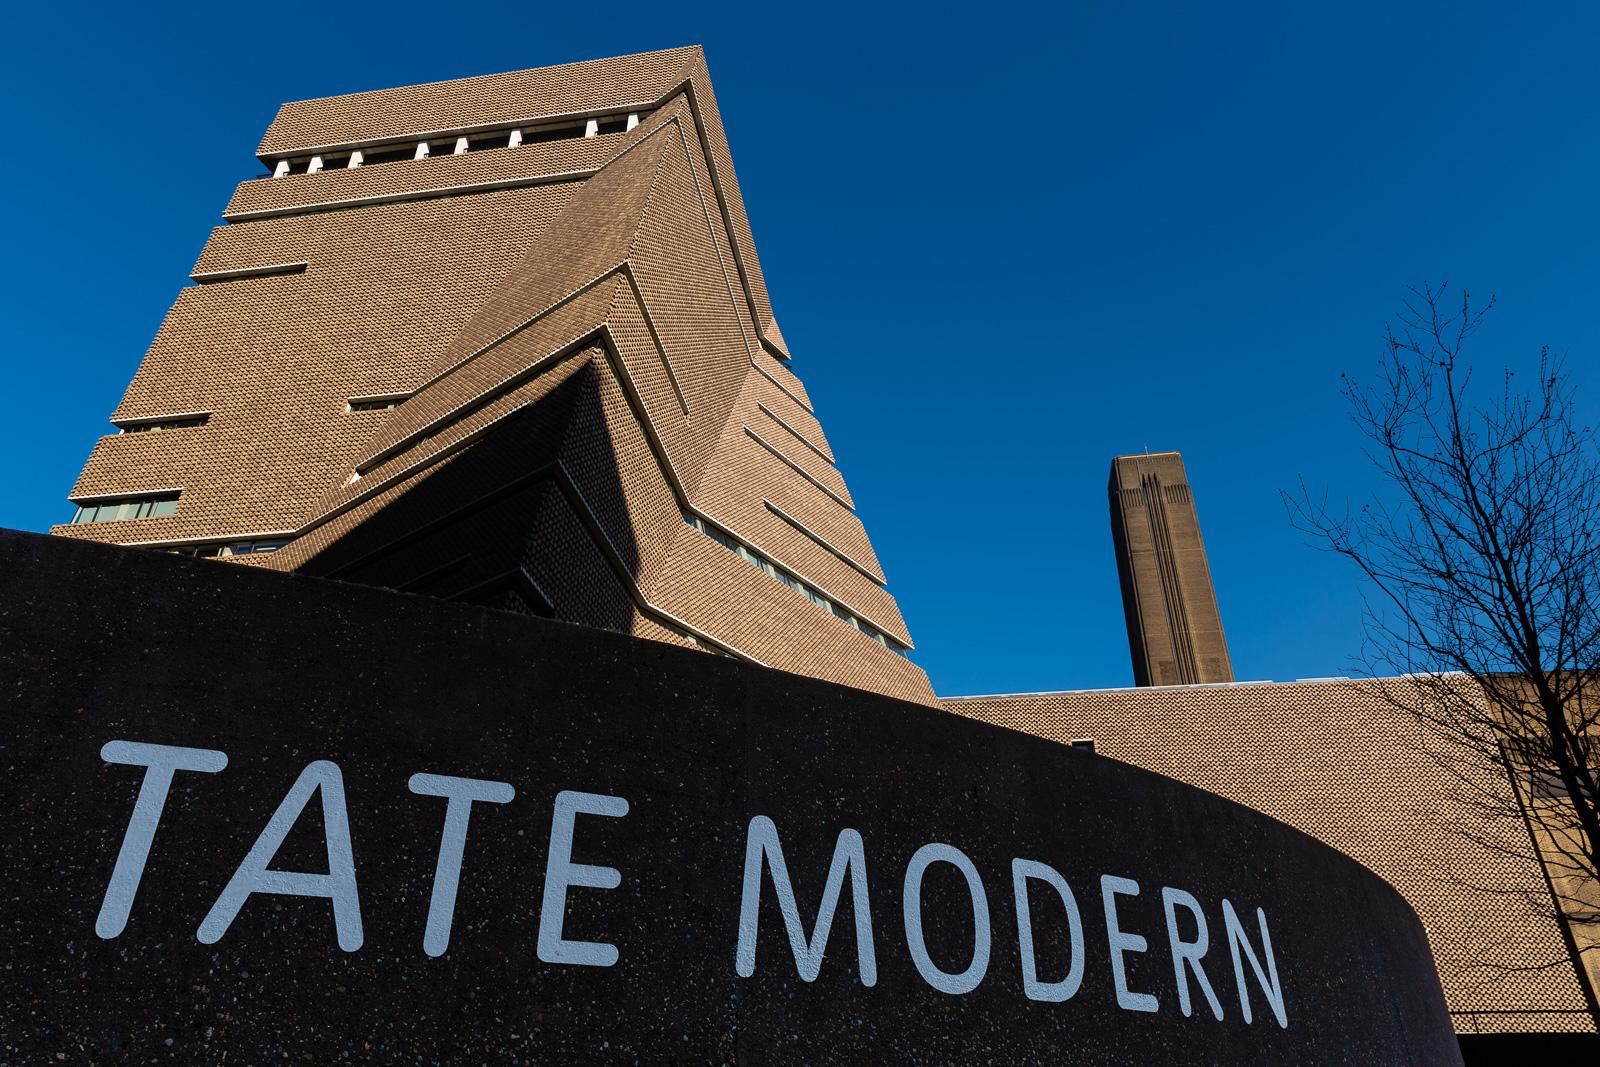 Exterior view of the Tate Modern